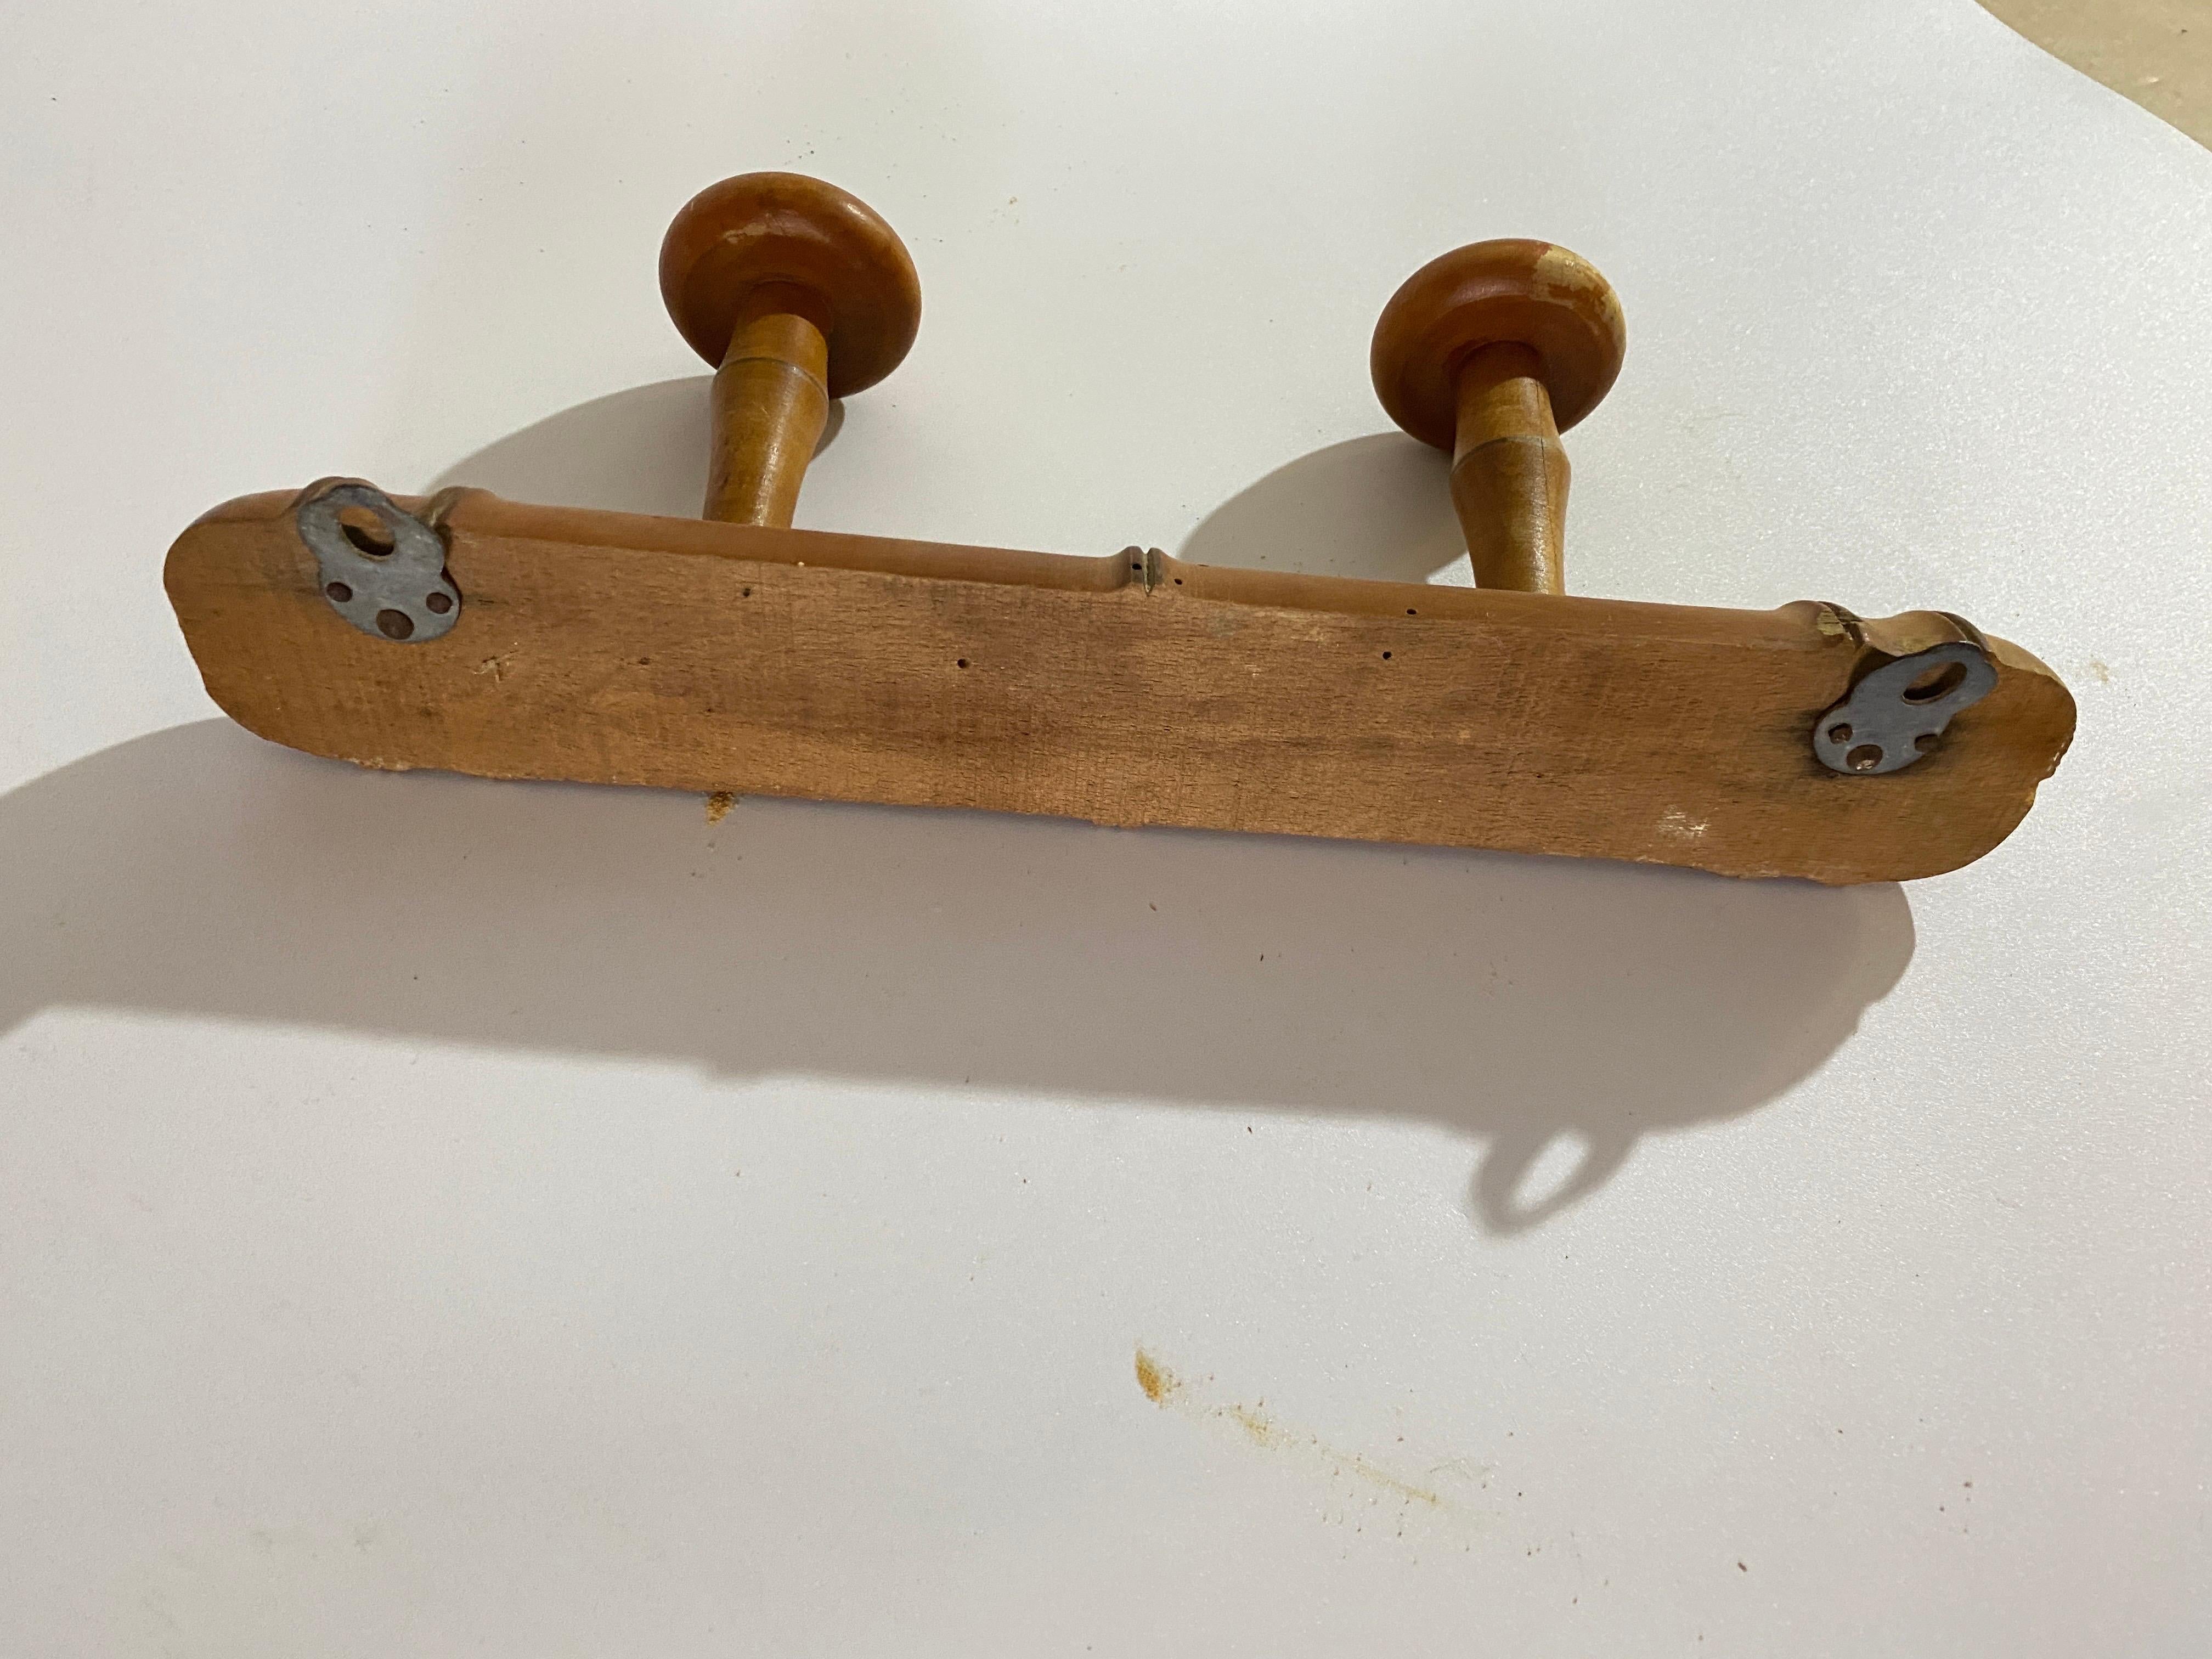 A superb antique French faux bamboo carved wood coat rack, circa 1920. This fine rack retains the lovely original surface and patina and has four hand turned pegs, perfect for hanging jackets and hats in an entryway or mudroom.